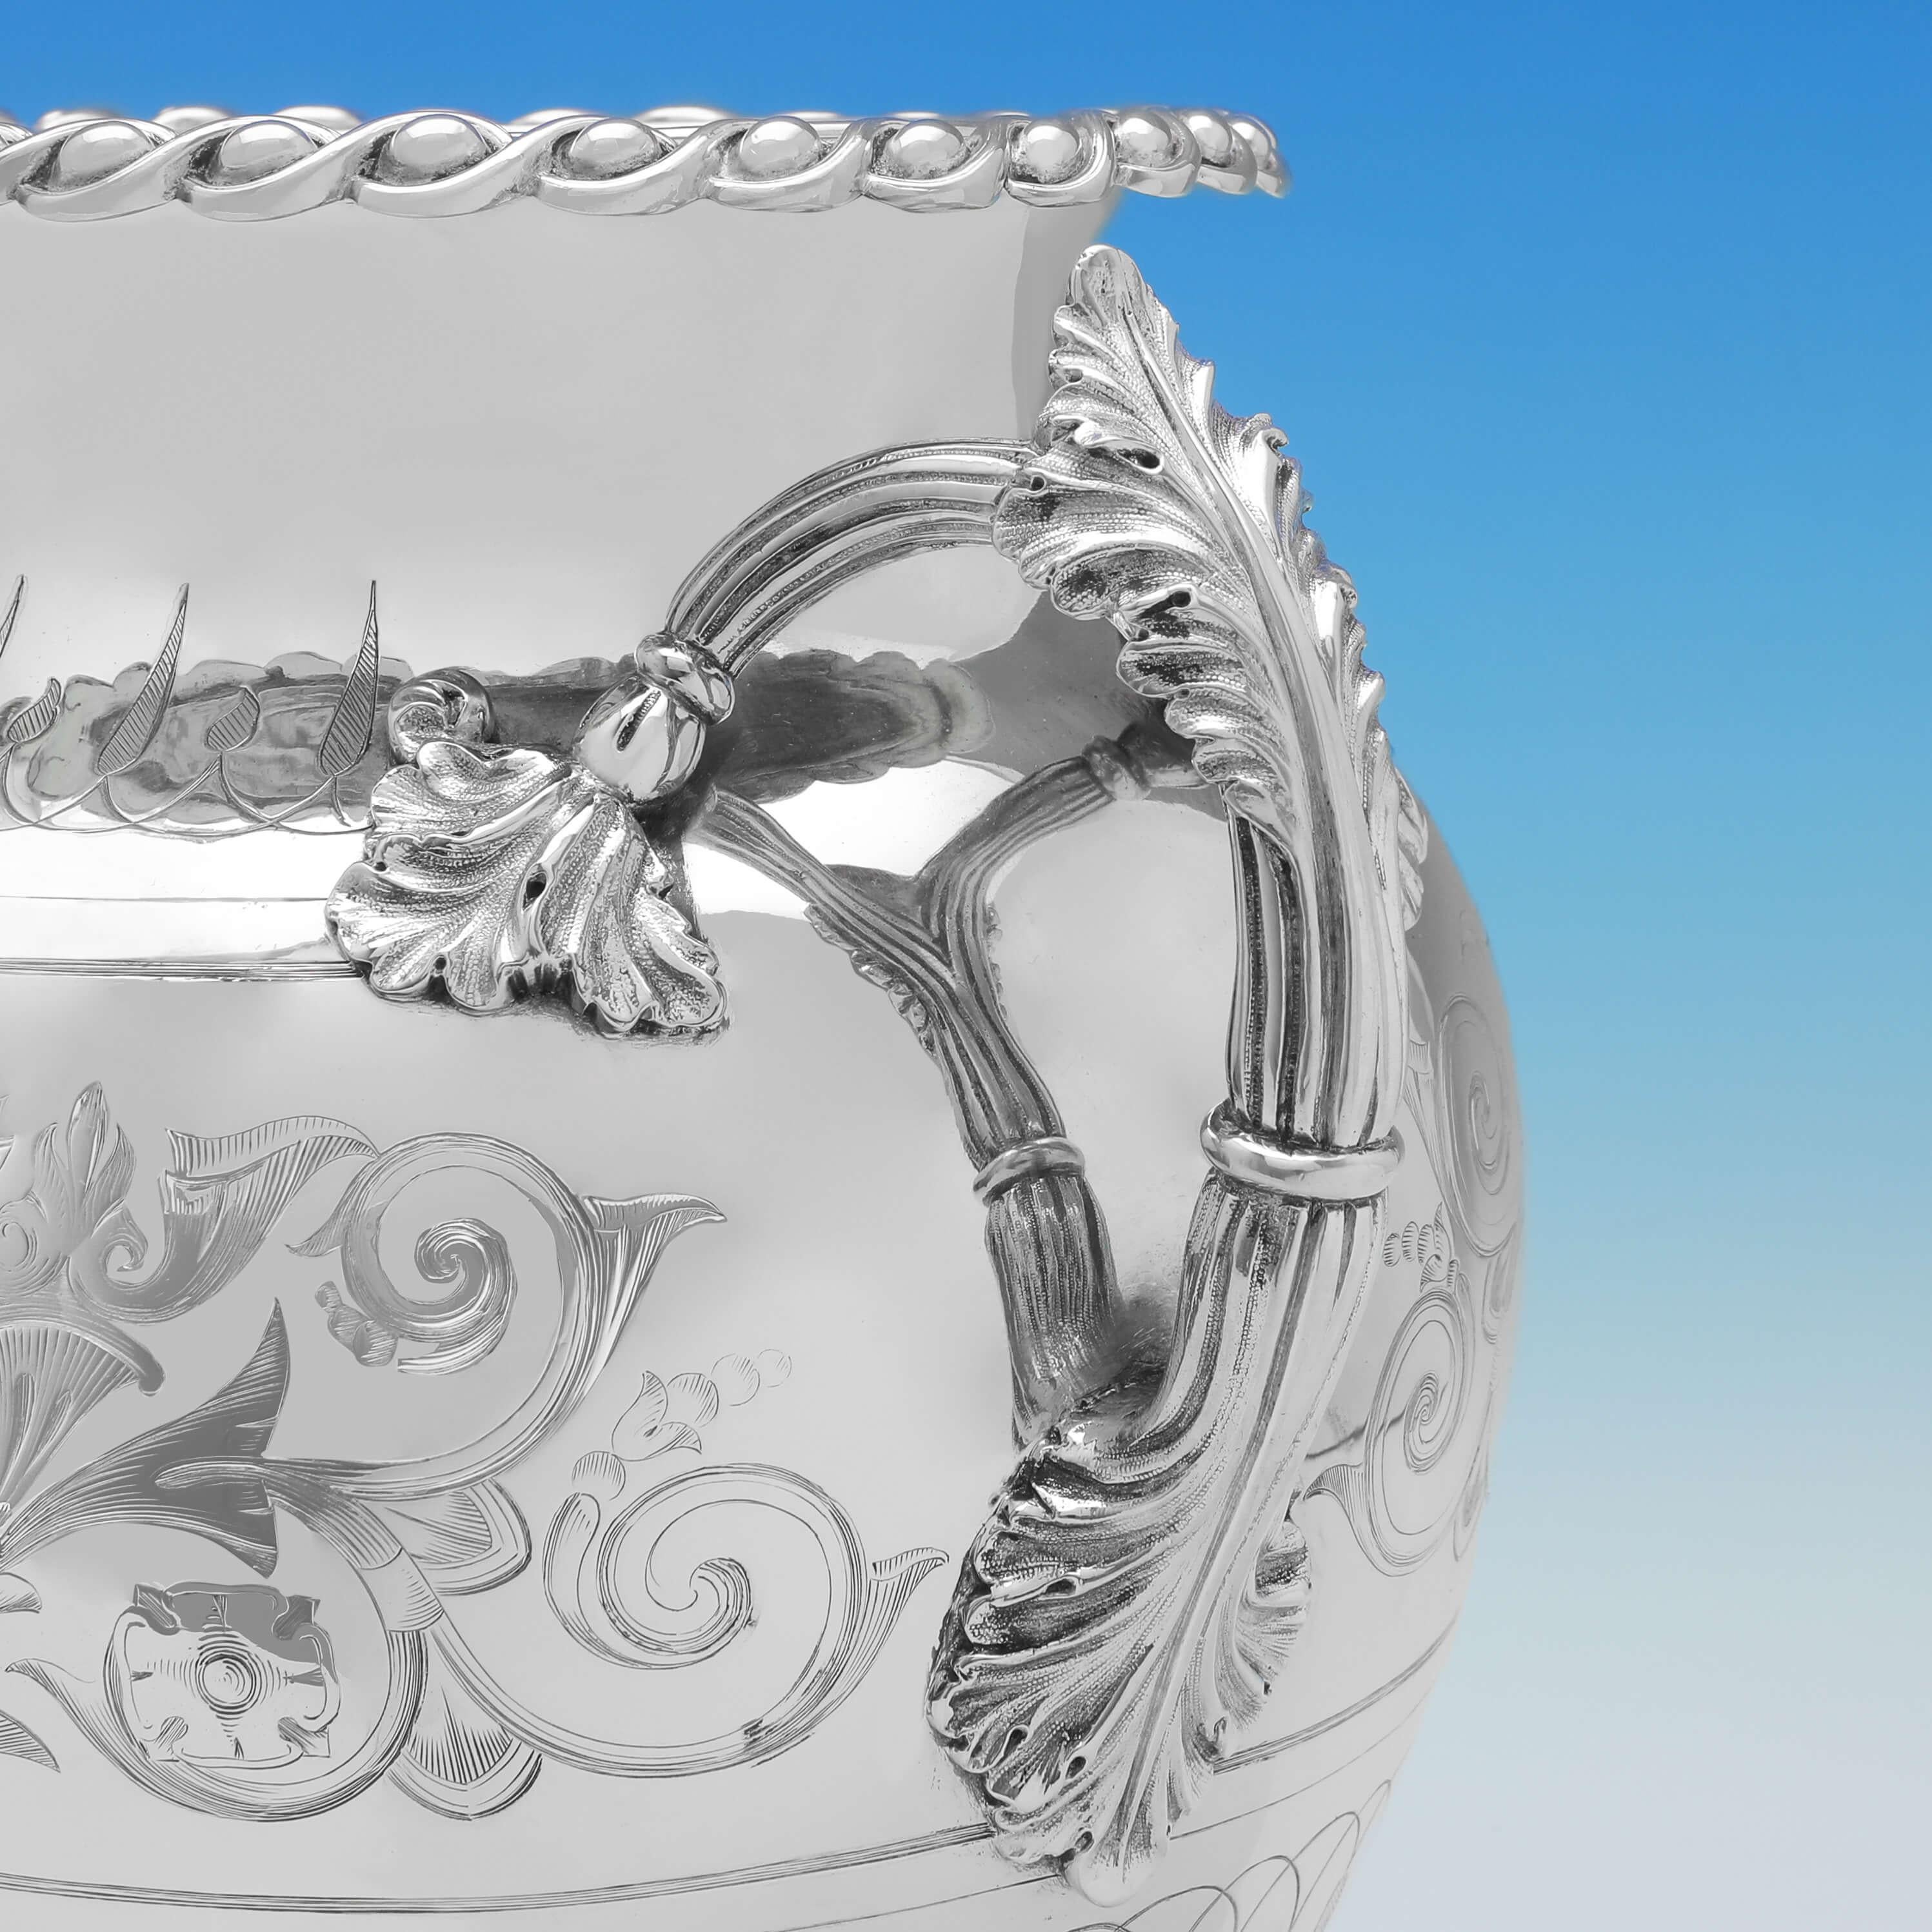 Engraved Amphora Shaped Neoclassical Revival Silver Plated Pair of Wine Coolers from 1855